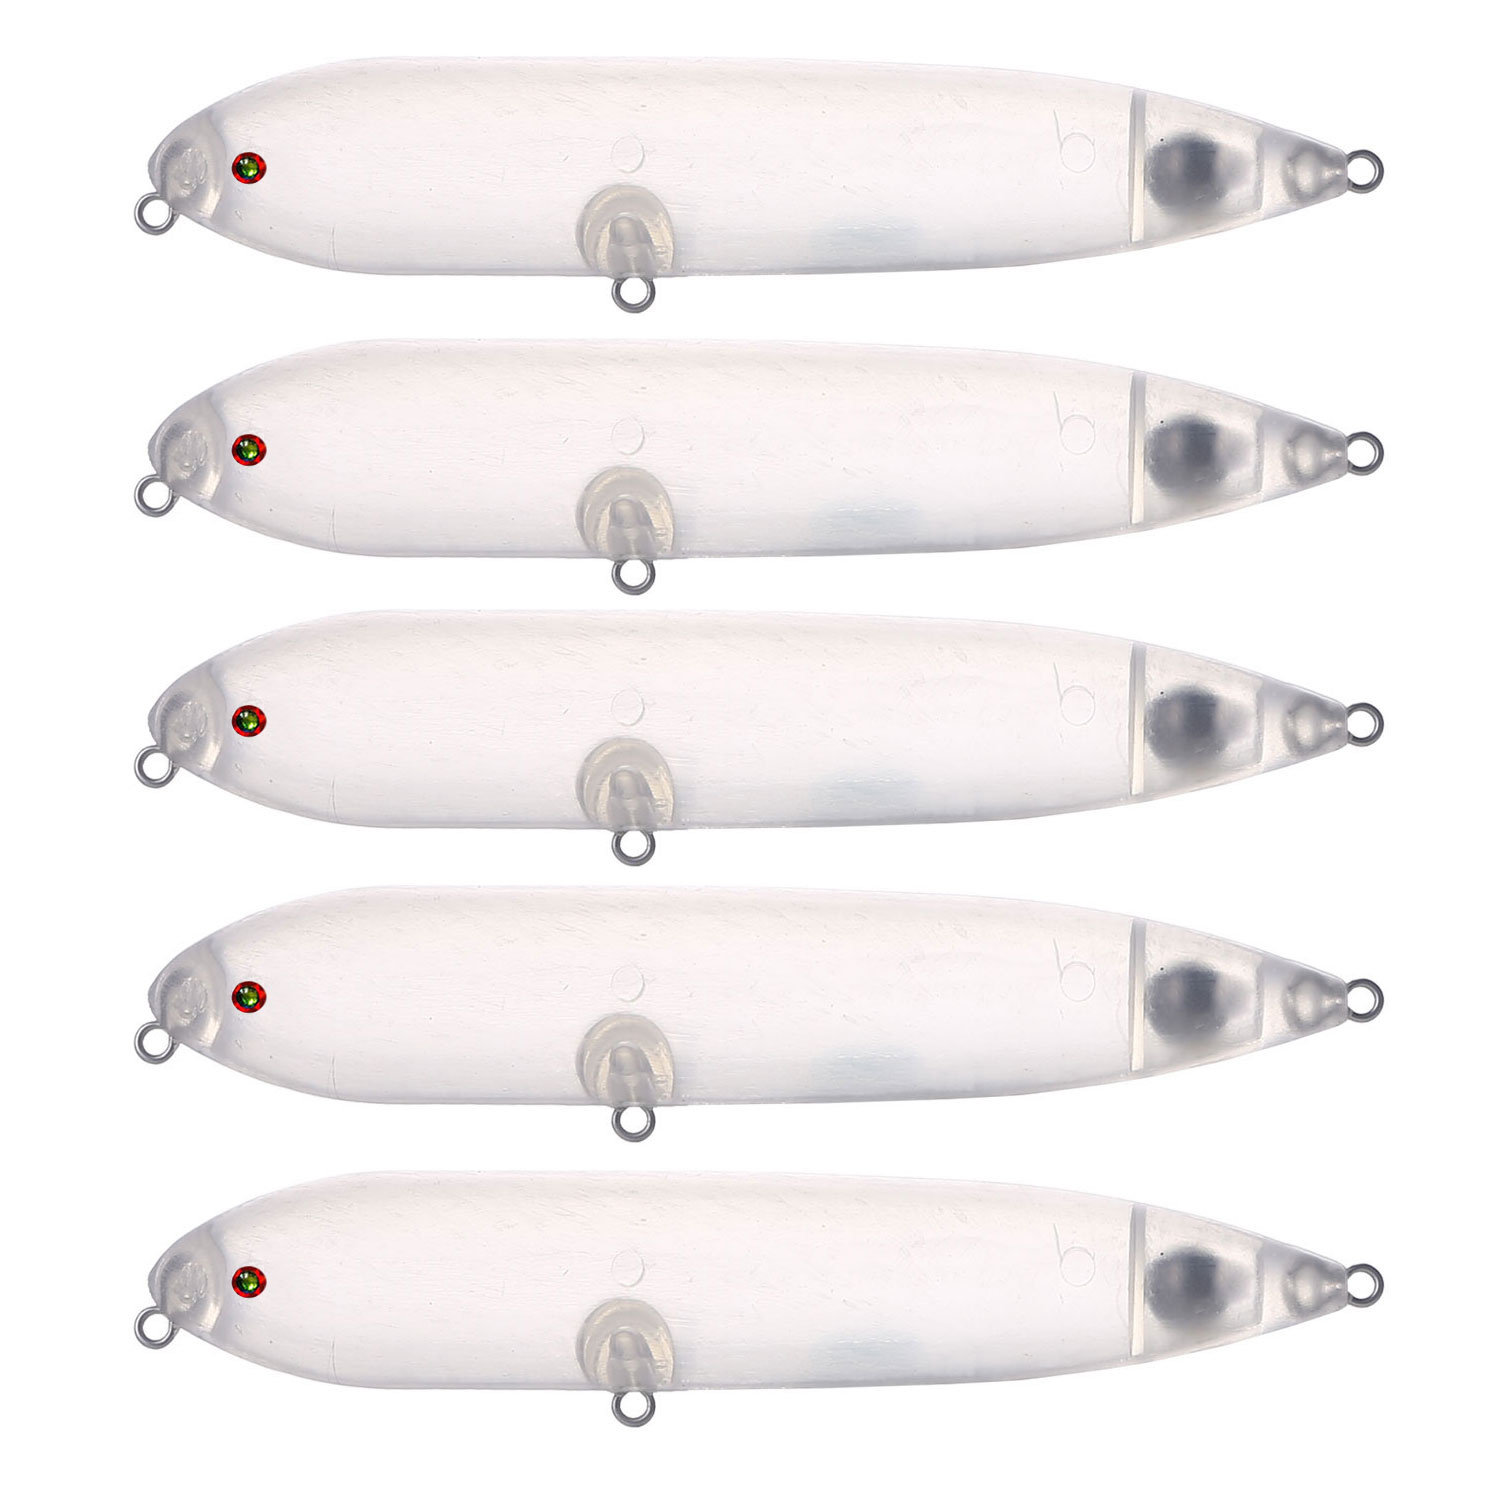 GYFISHING Set Of Unpainted 5 Walk Dog Topwater Blanks For Fishing Lure  Blanks From Ai792, $20.31